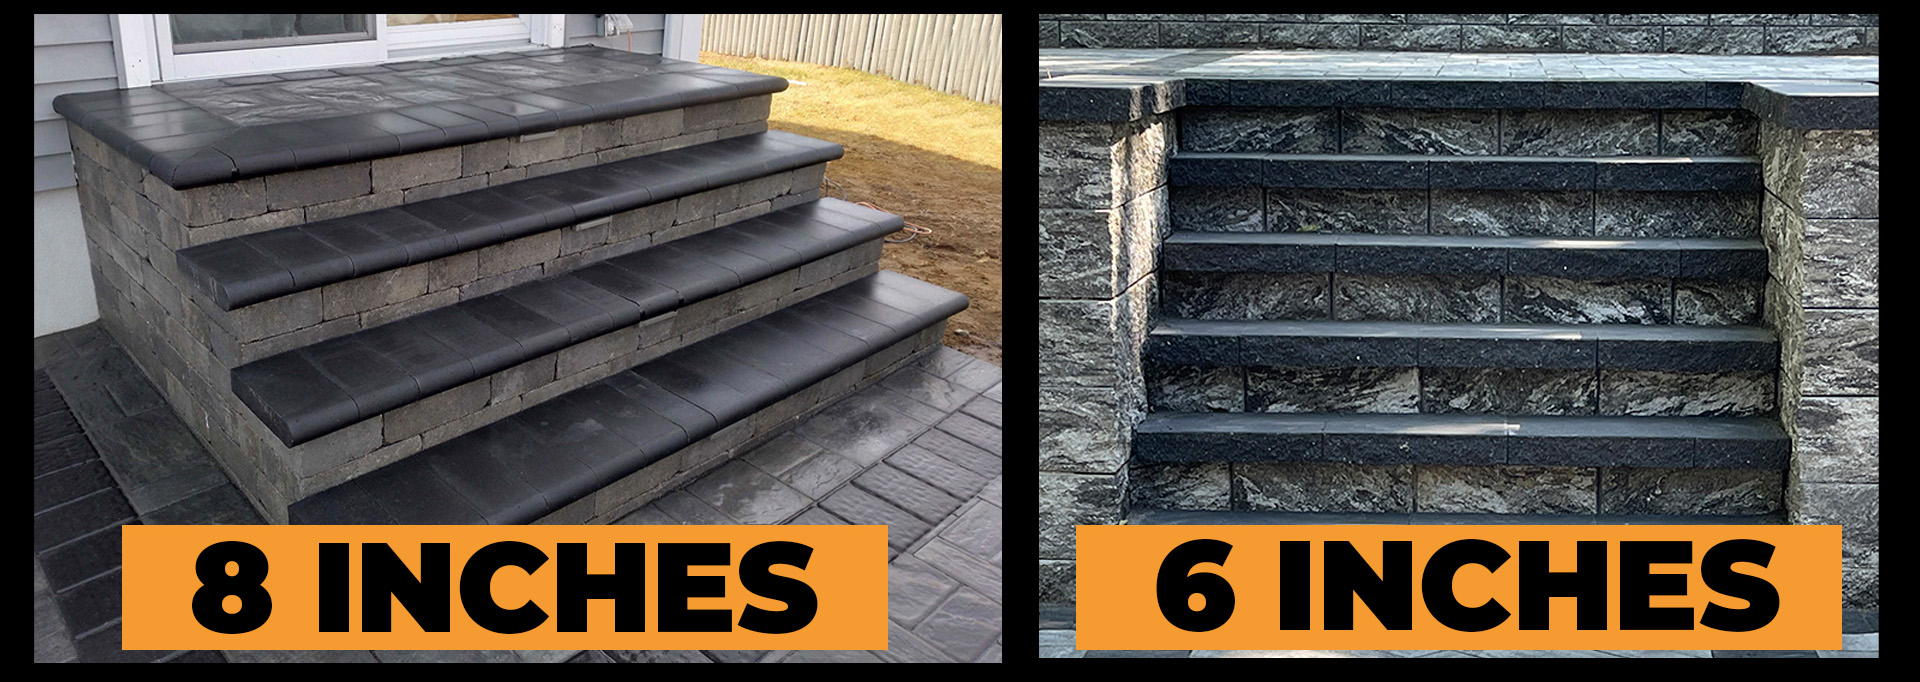 Natural stone steps with unique textures that add visual interest to the landscape